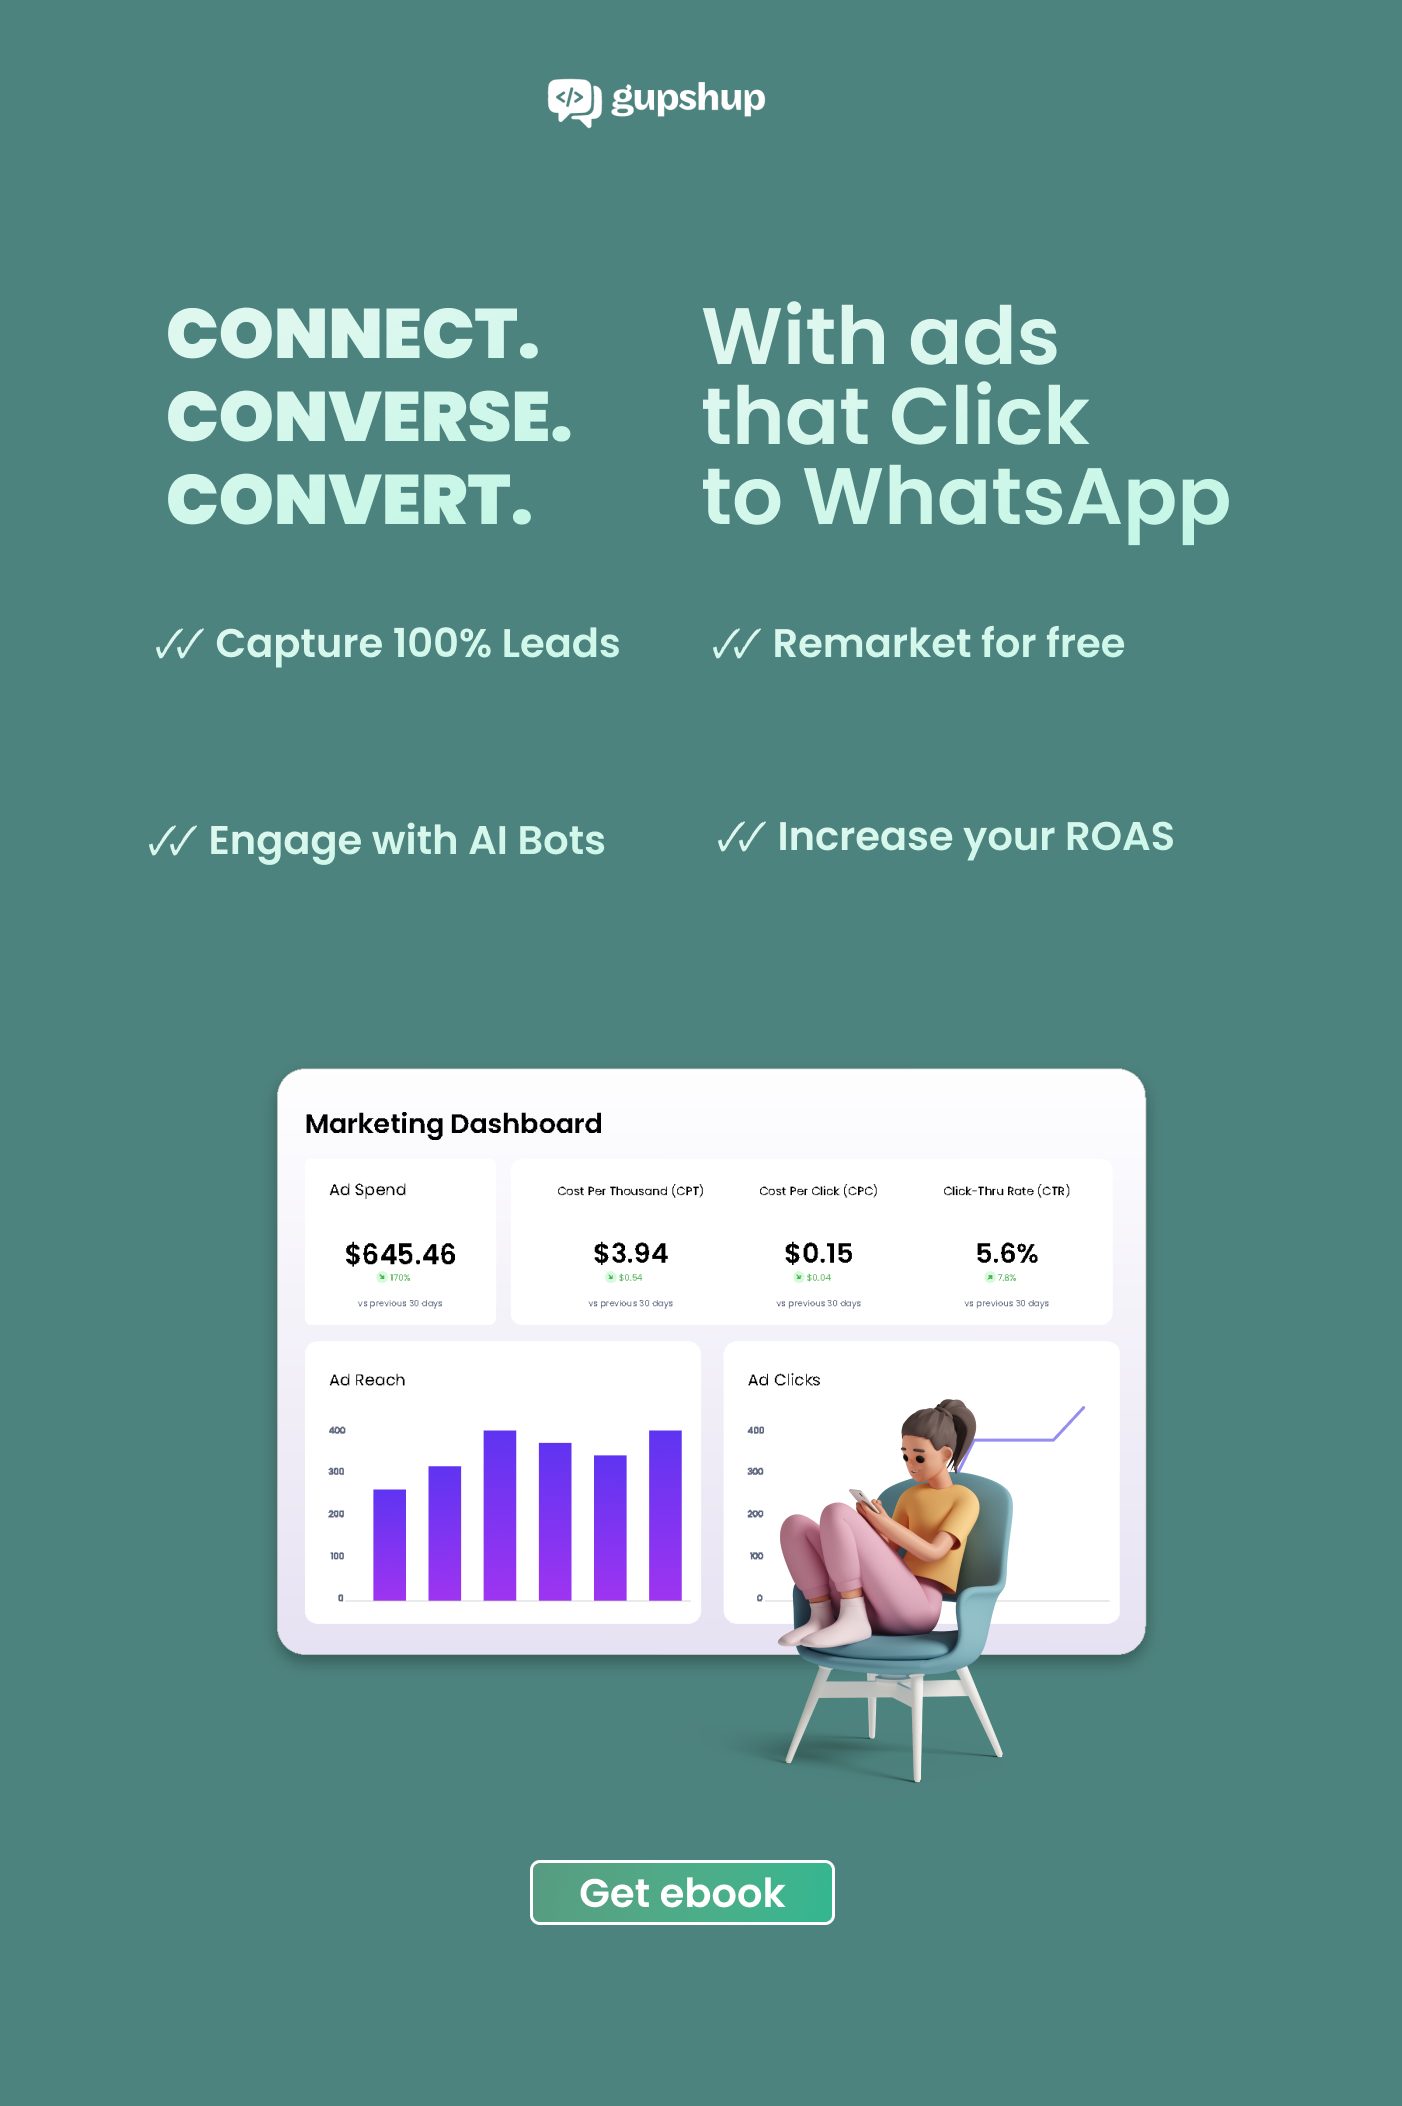 Connect, converse and convert with Ads that click to WhatsApp